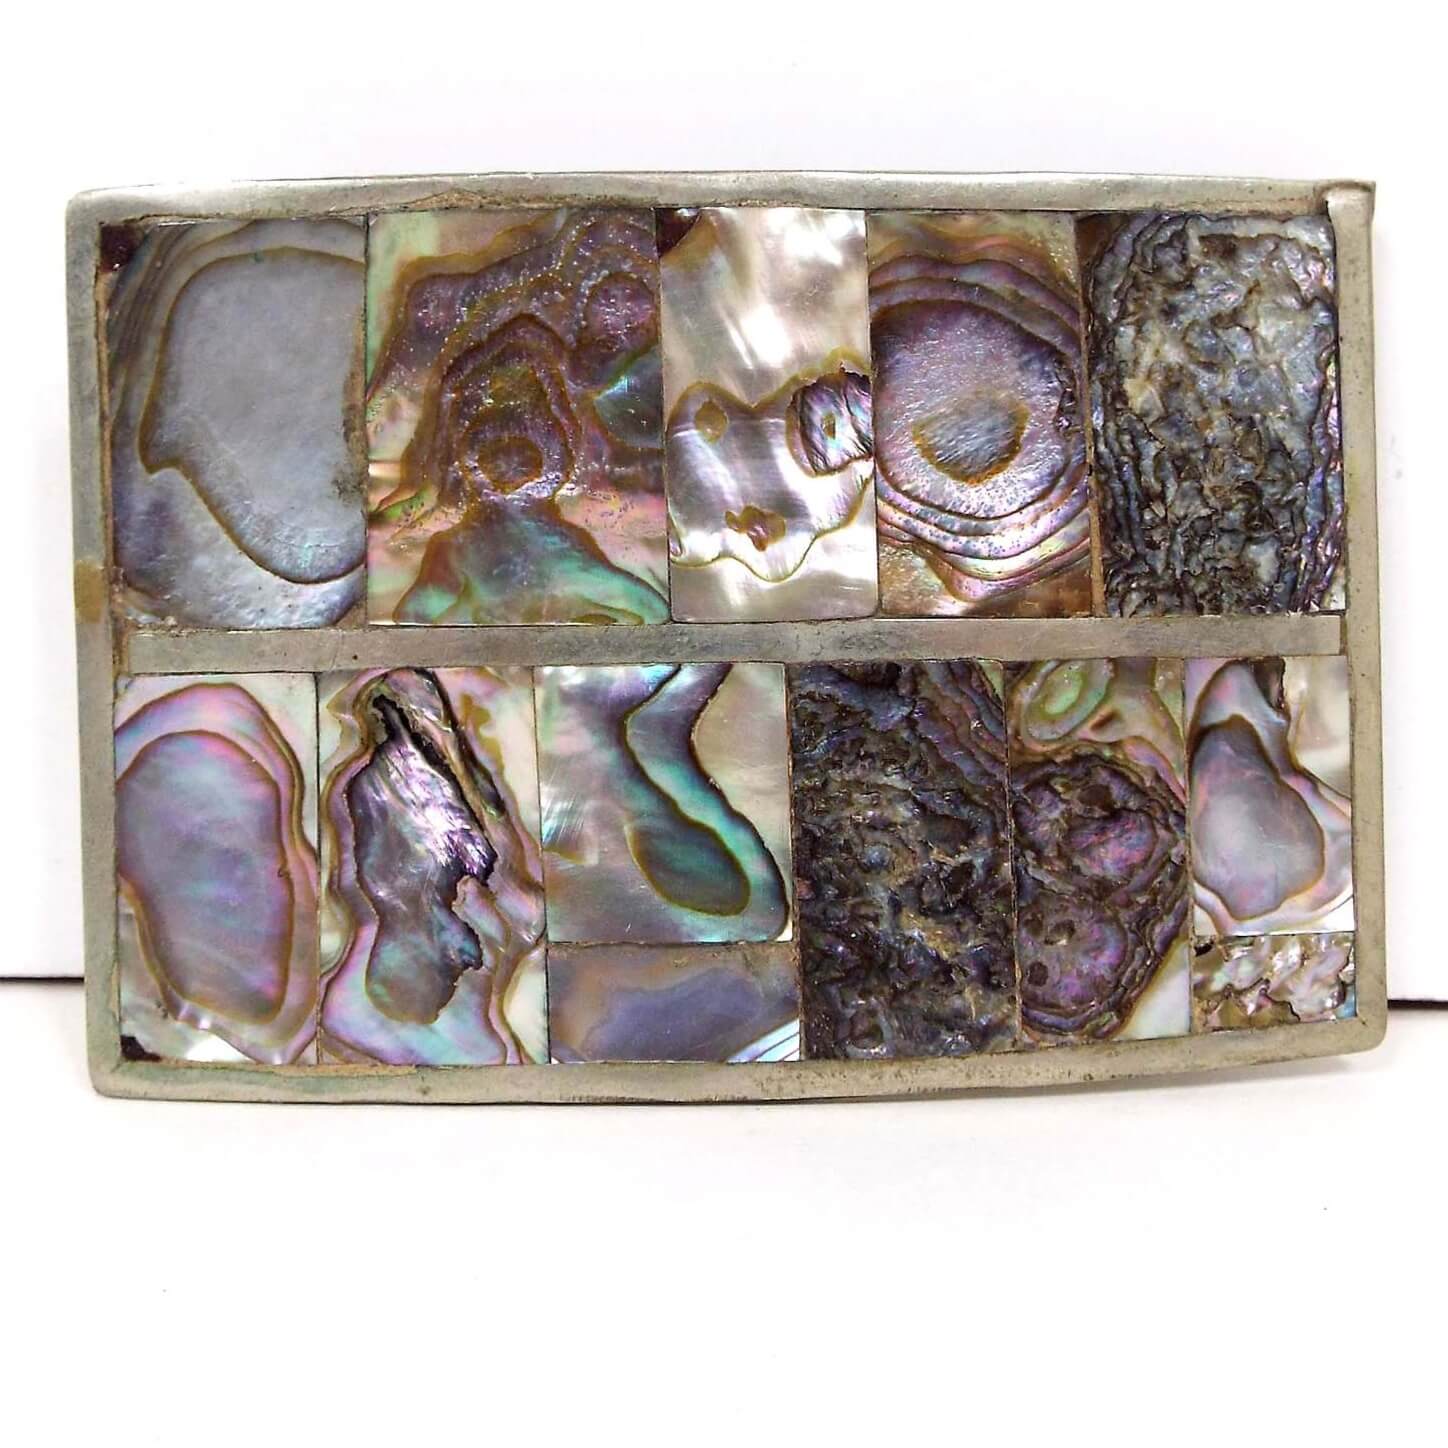 Front view of the retro vintage abalone belt buckle made in Mexico. It is rectangle in shape with silver tone color metal. There are rectangular pieces of abalone shell inlaid across two rows on the front.